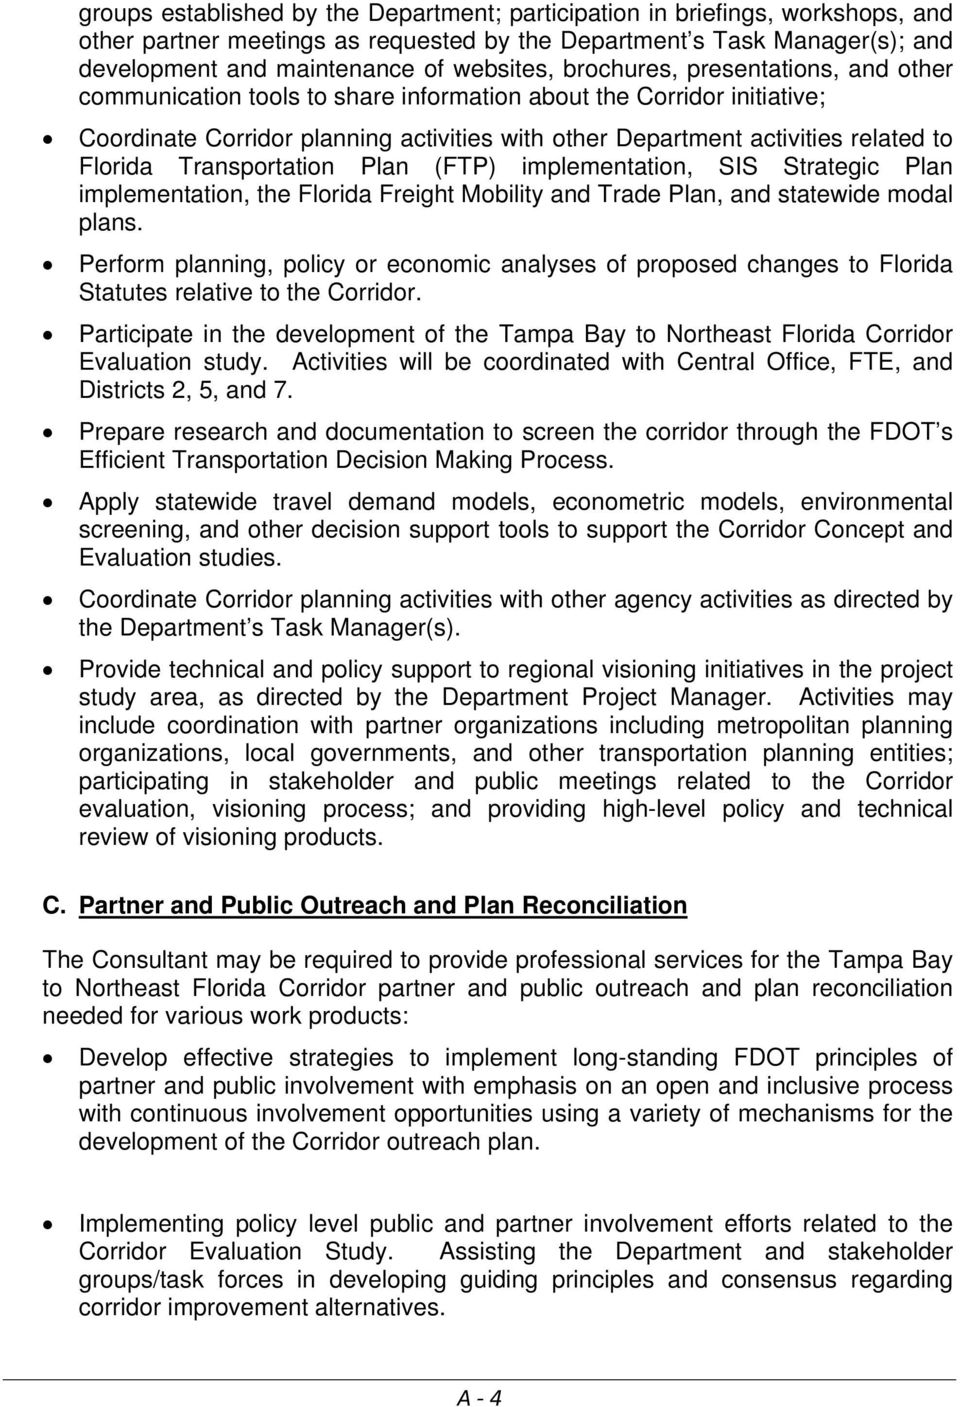 Transportation Plan (FTP) implementation, SIS Strategic Plan implementation, the Florida Freight Mobility and Trade Plan, and statewide modal plans.